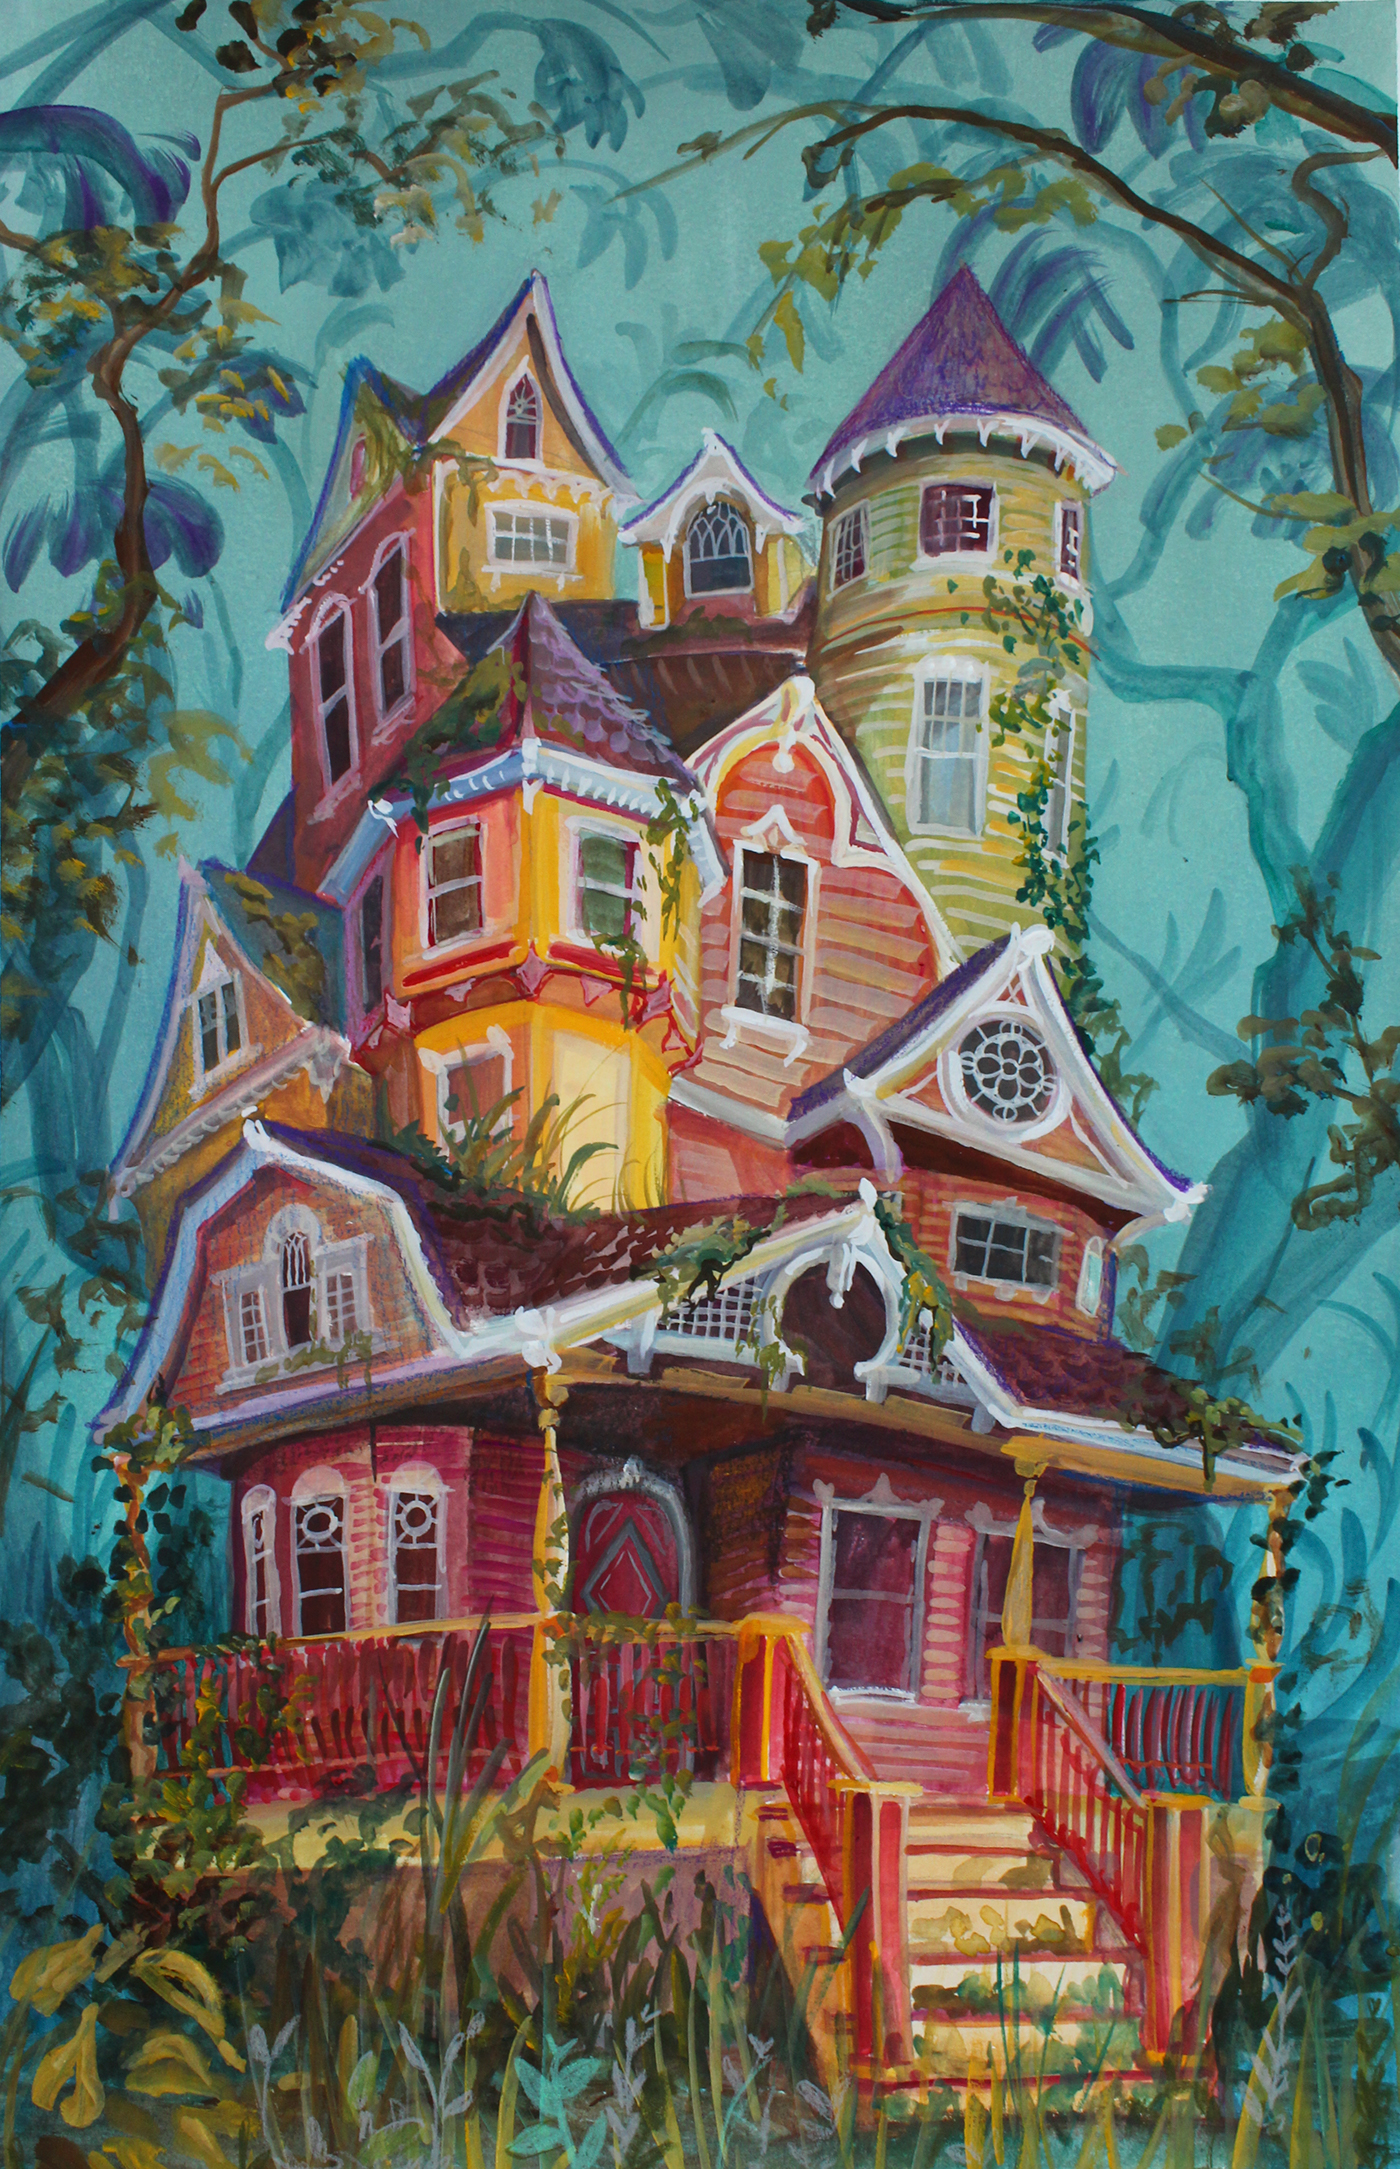 Environment design background design whimsical house architecture whimsy colorful Magical